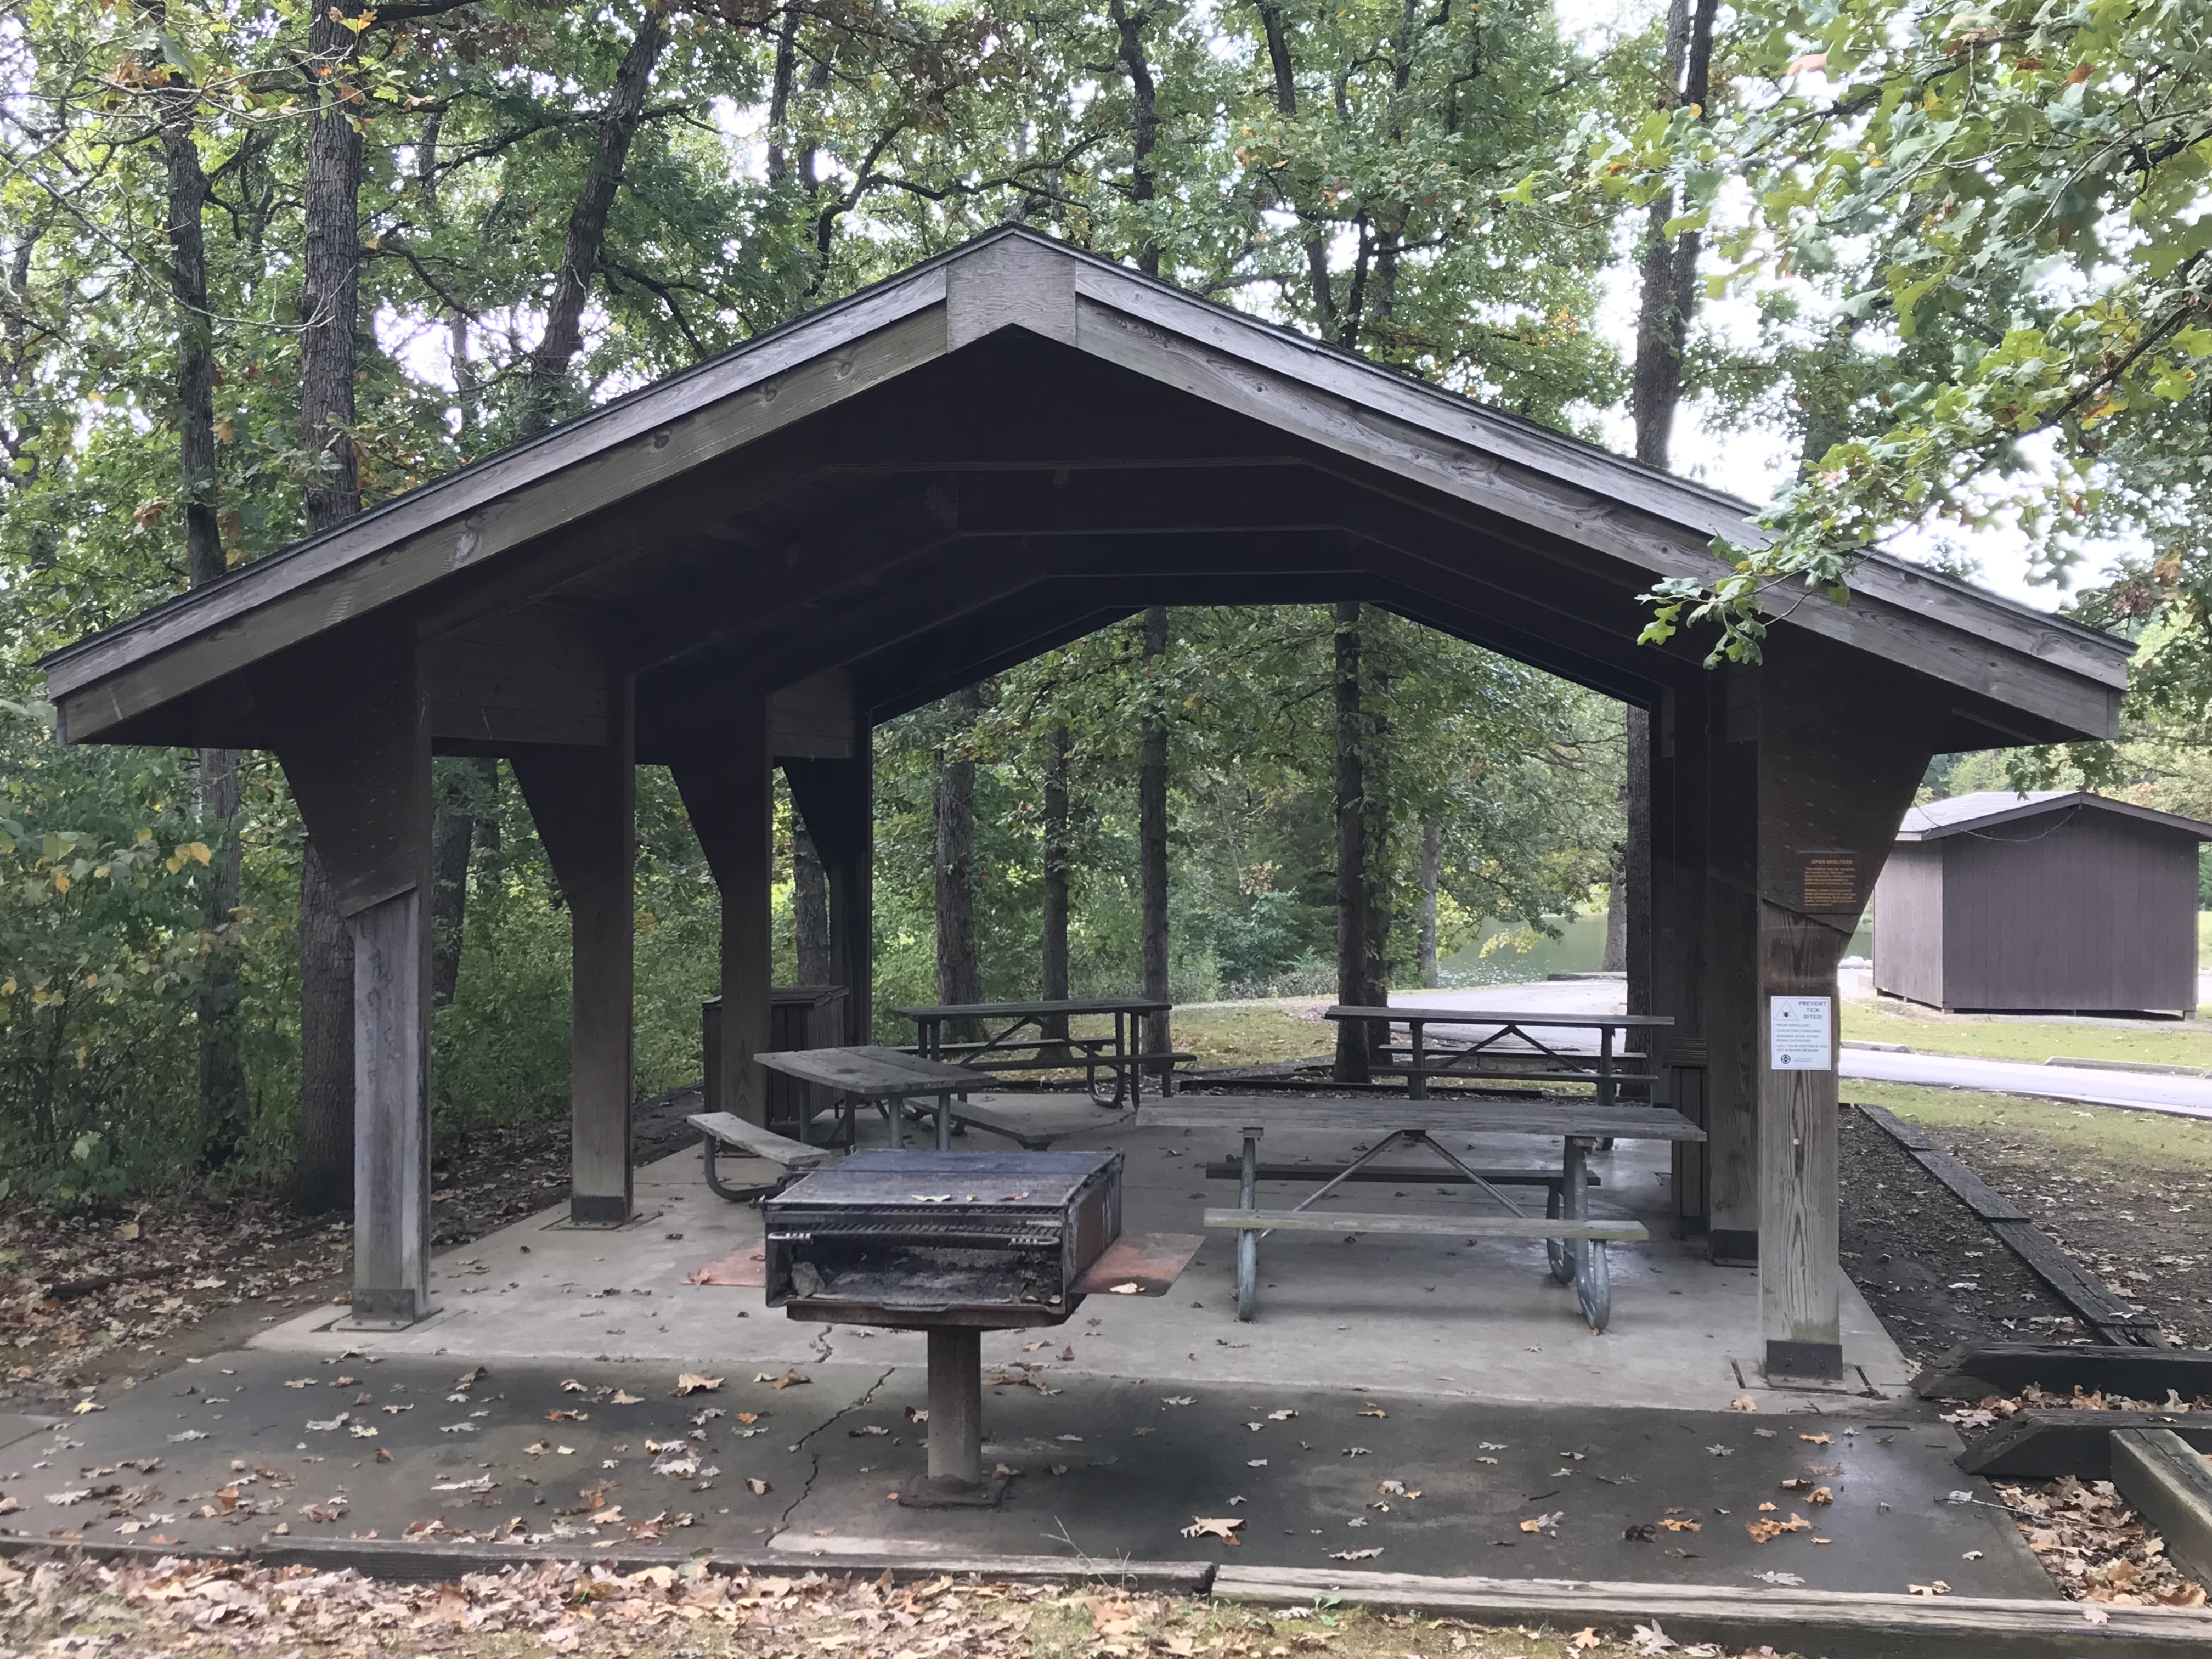 Open picnic shelter with picnic tables, a grill and a trash receptacle